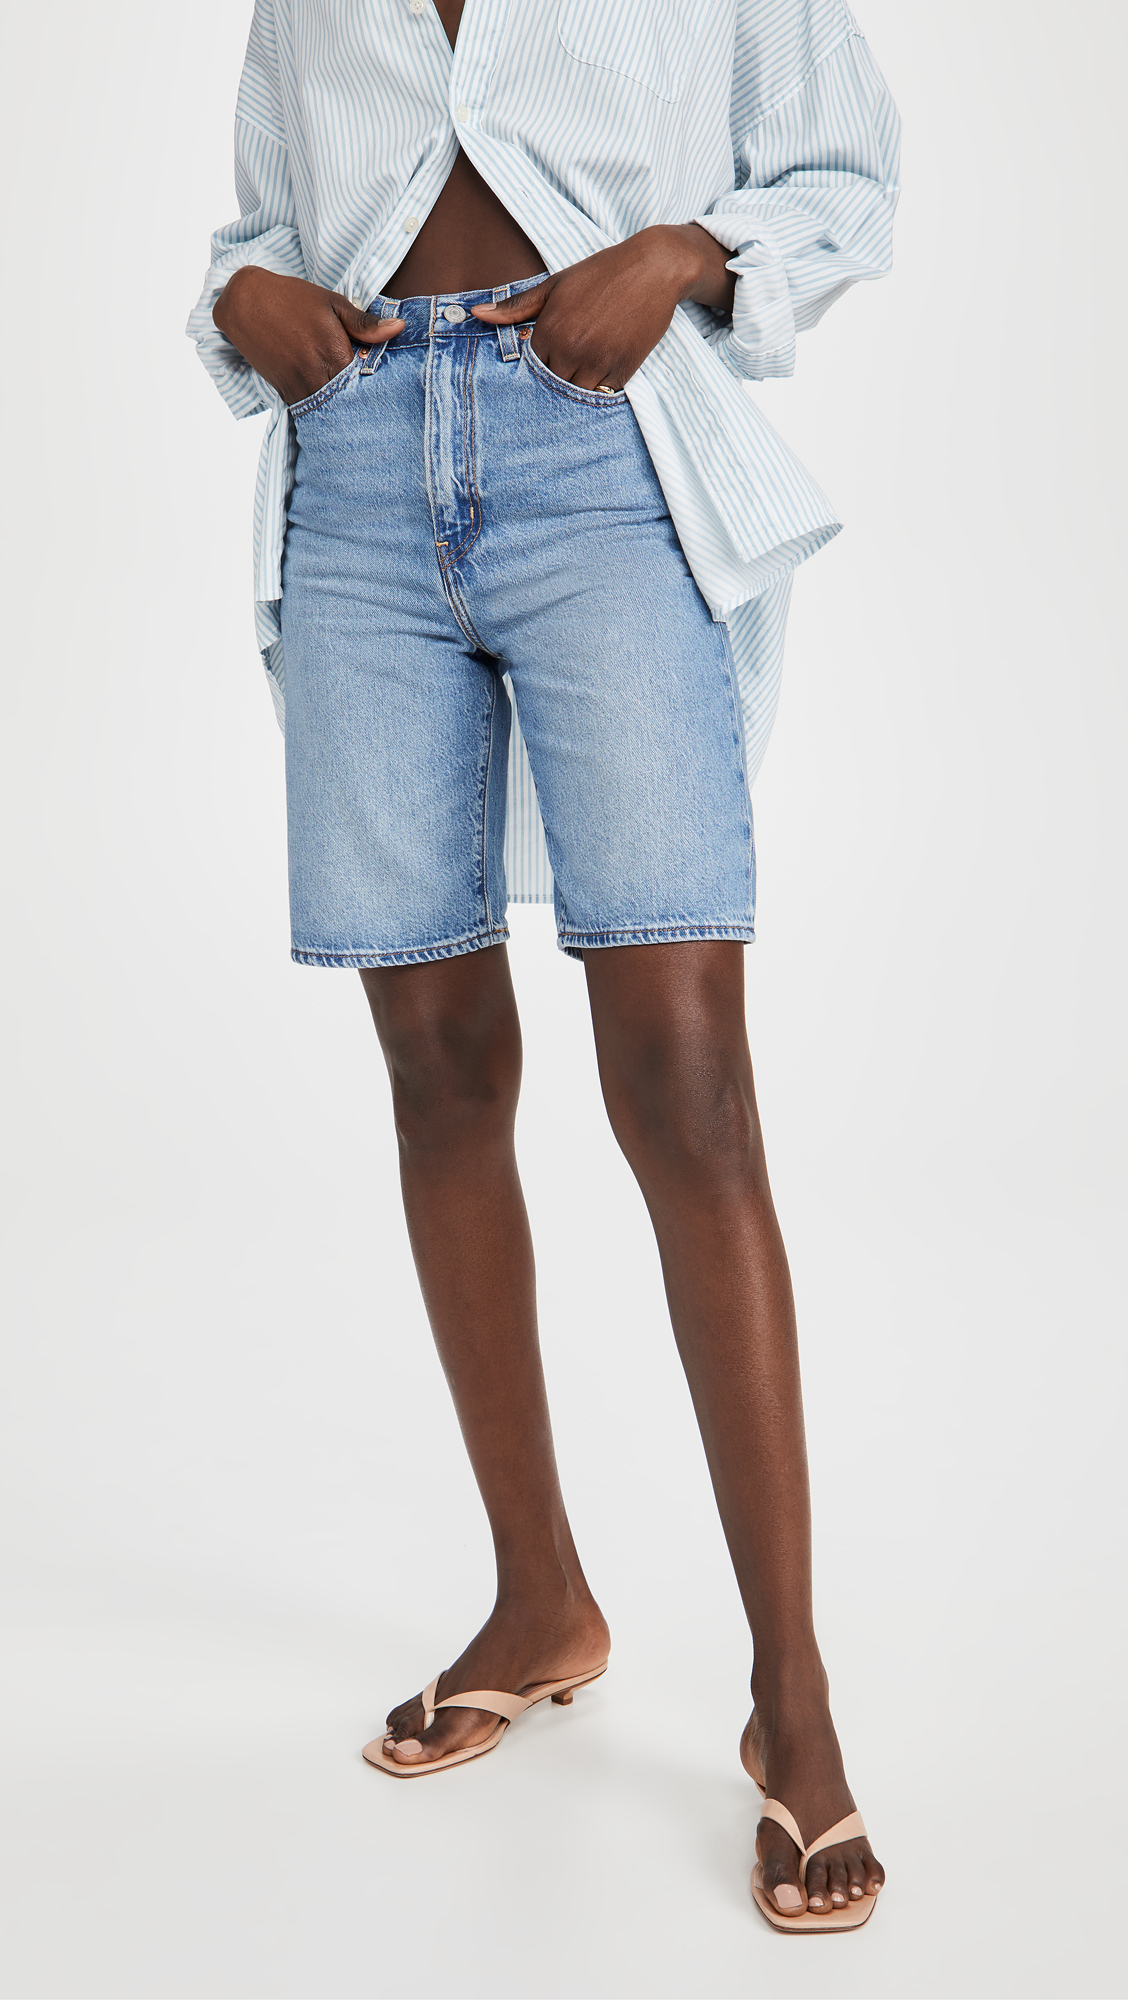 The 7 Best Shorts Brands for Women in 2023 | Who What Wear